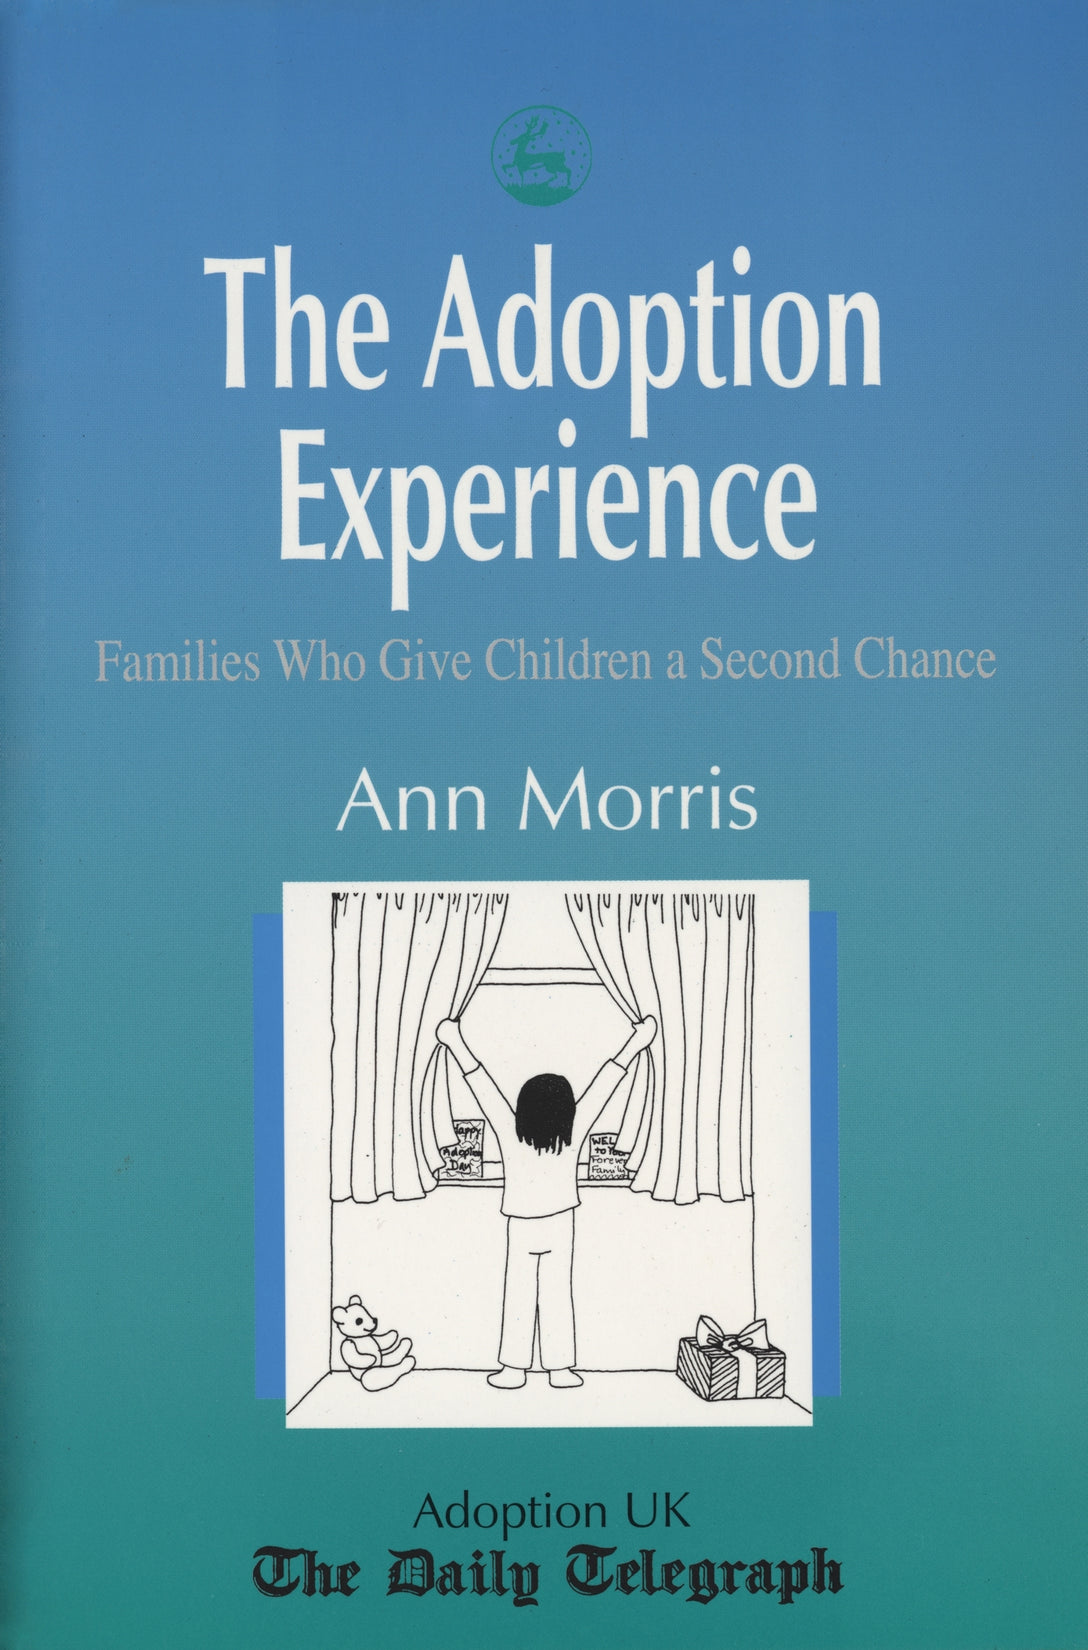 The Adoption Experience by Ann Morris